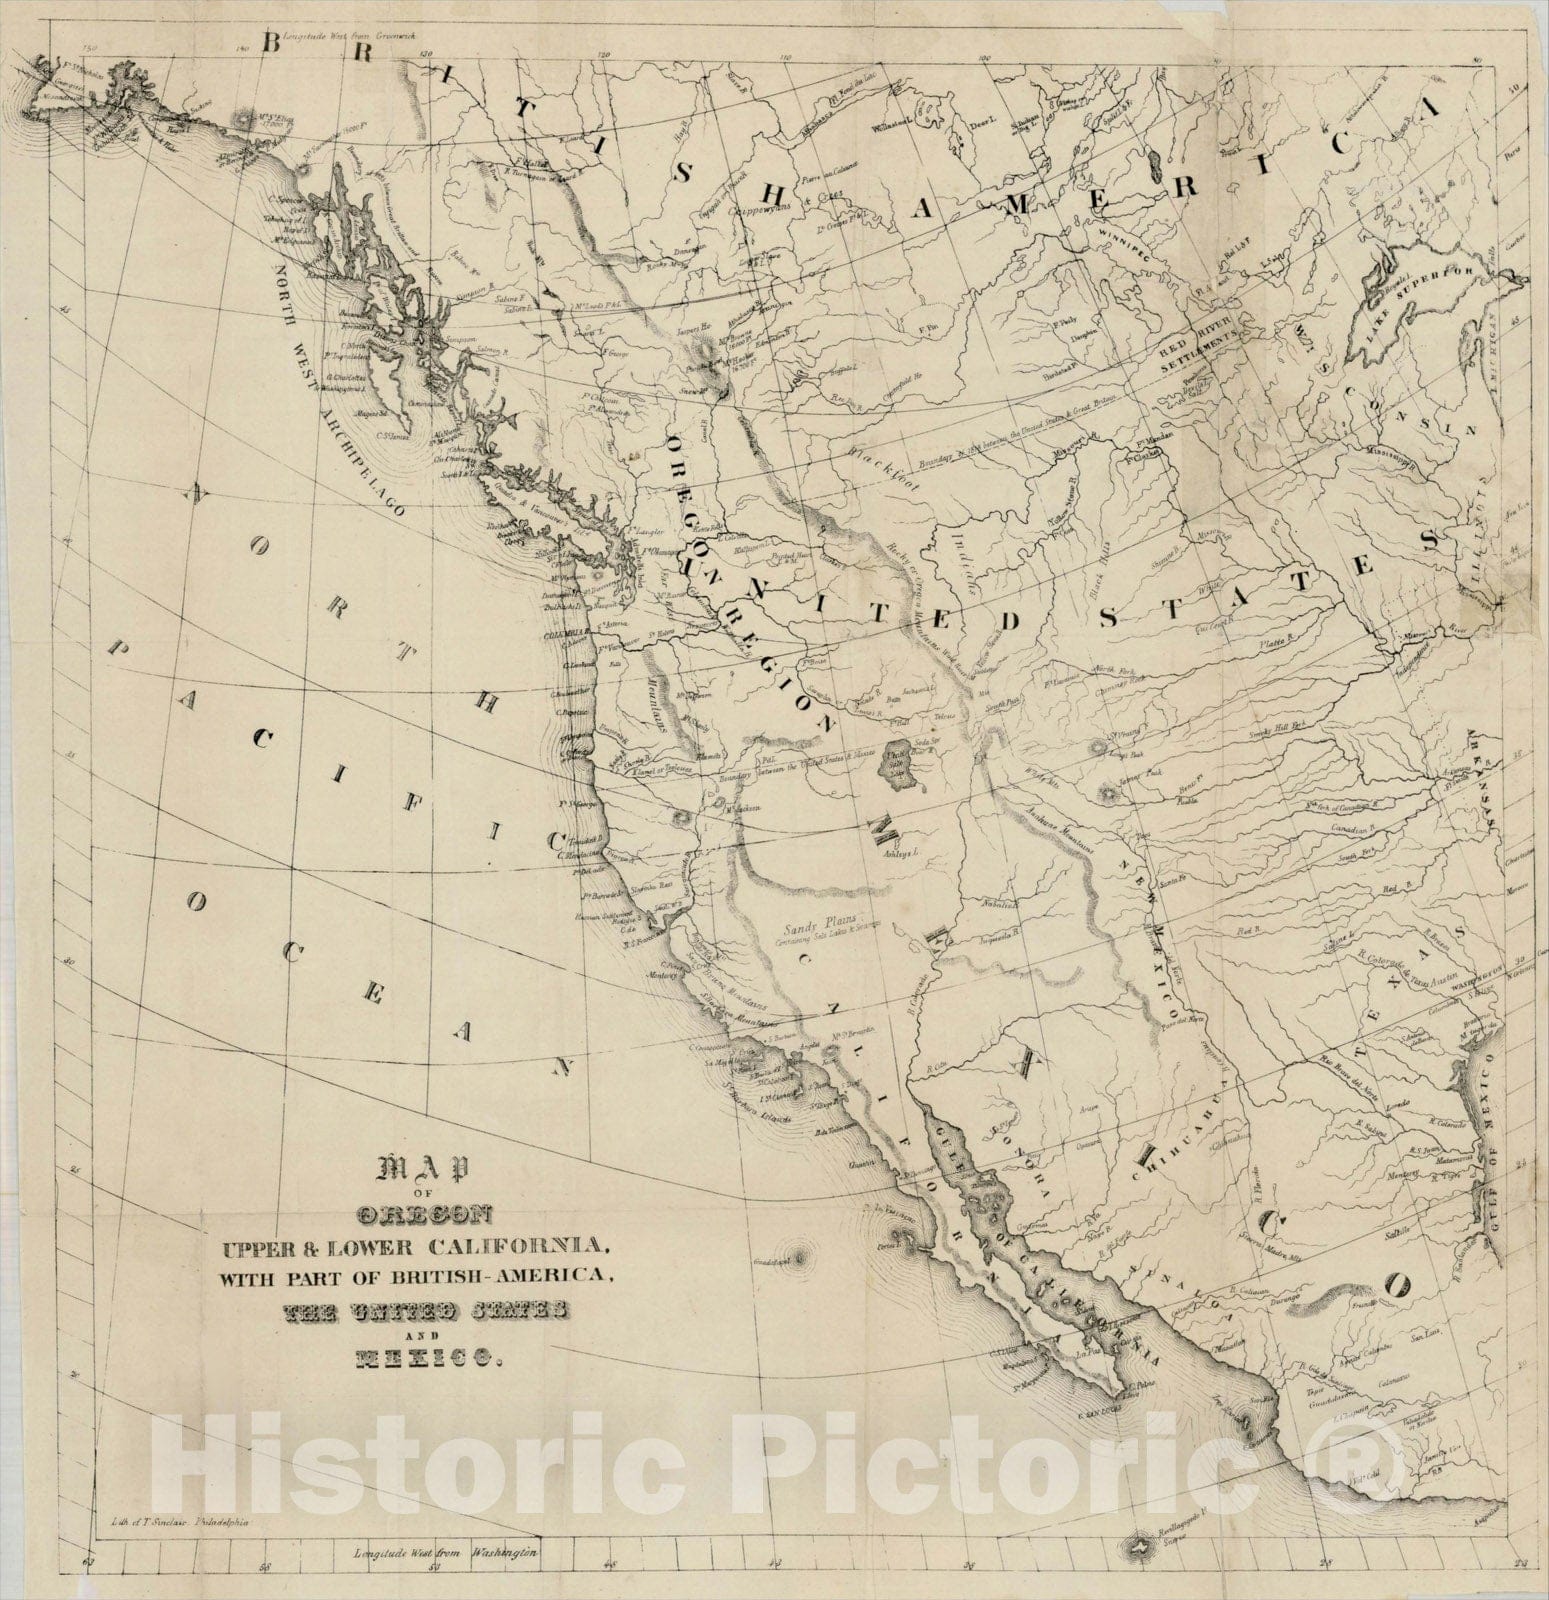 Historic Map : Map of Oregon Upper & Lower California, with part of British-America, The United States and Mexico., 1846, Thomas Sinclair, Vintage Wall Art